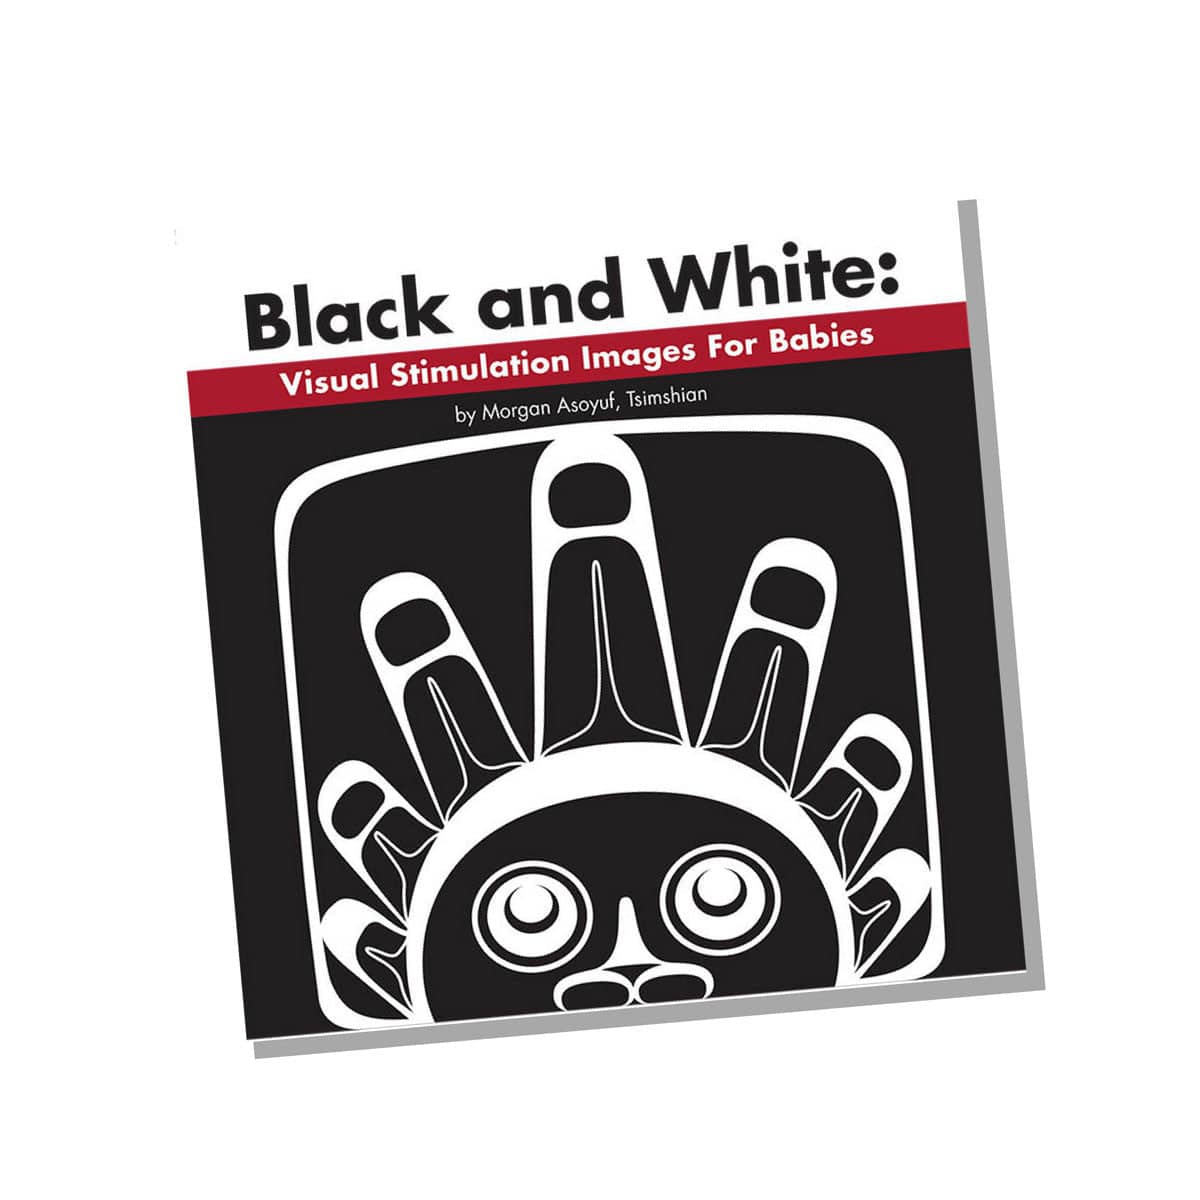 Native Northwest board book Black and White: Visual Stimulation Images for Babies Native Northwest Board Book